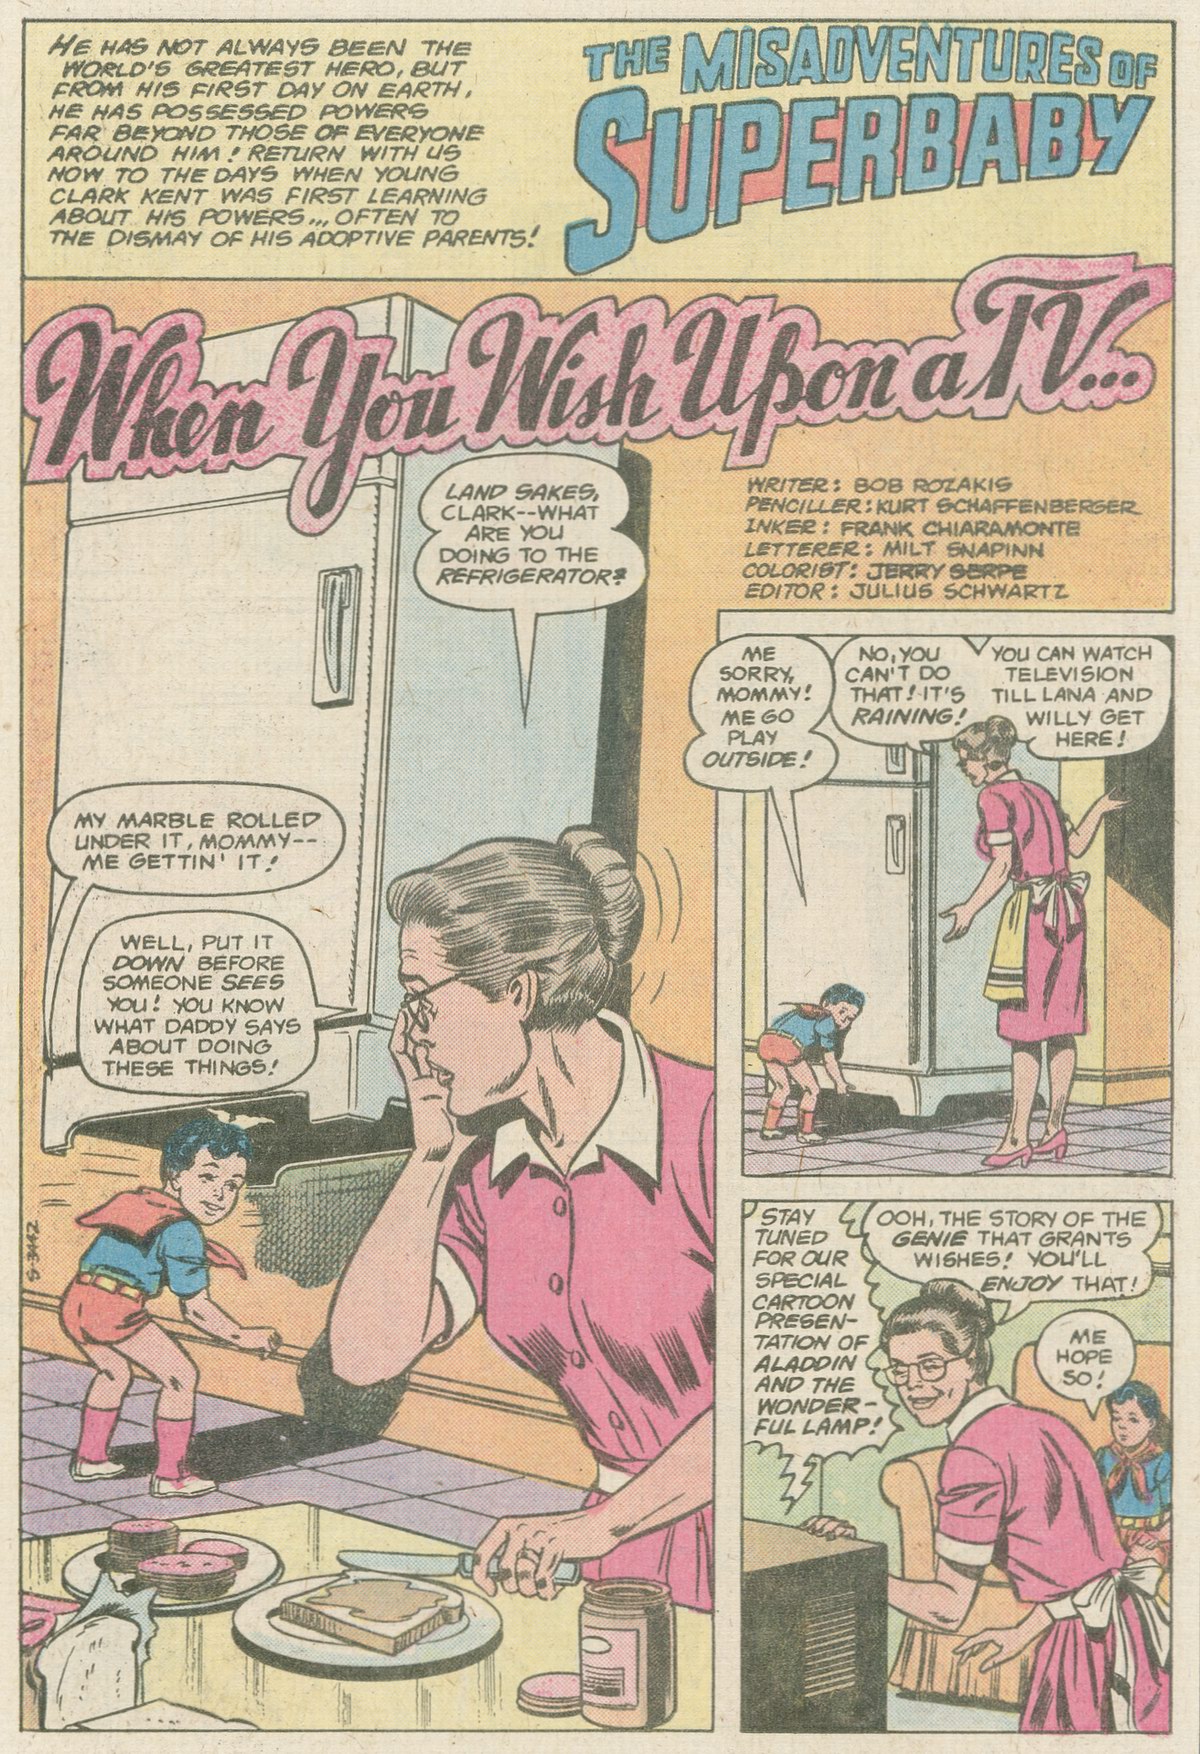 The New Adventures of Superboy 11 Page 18